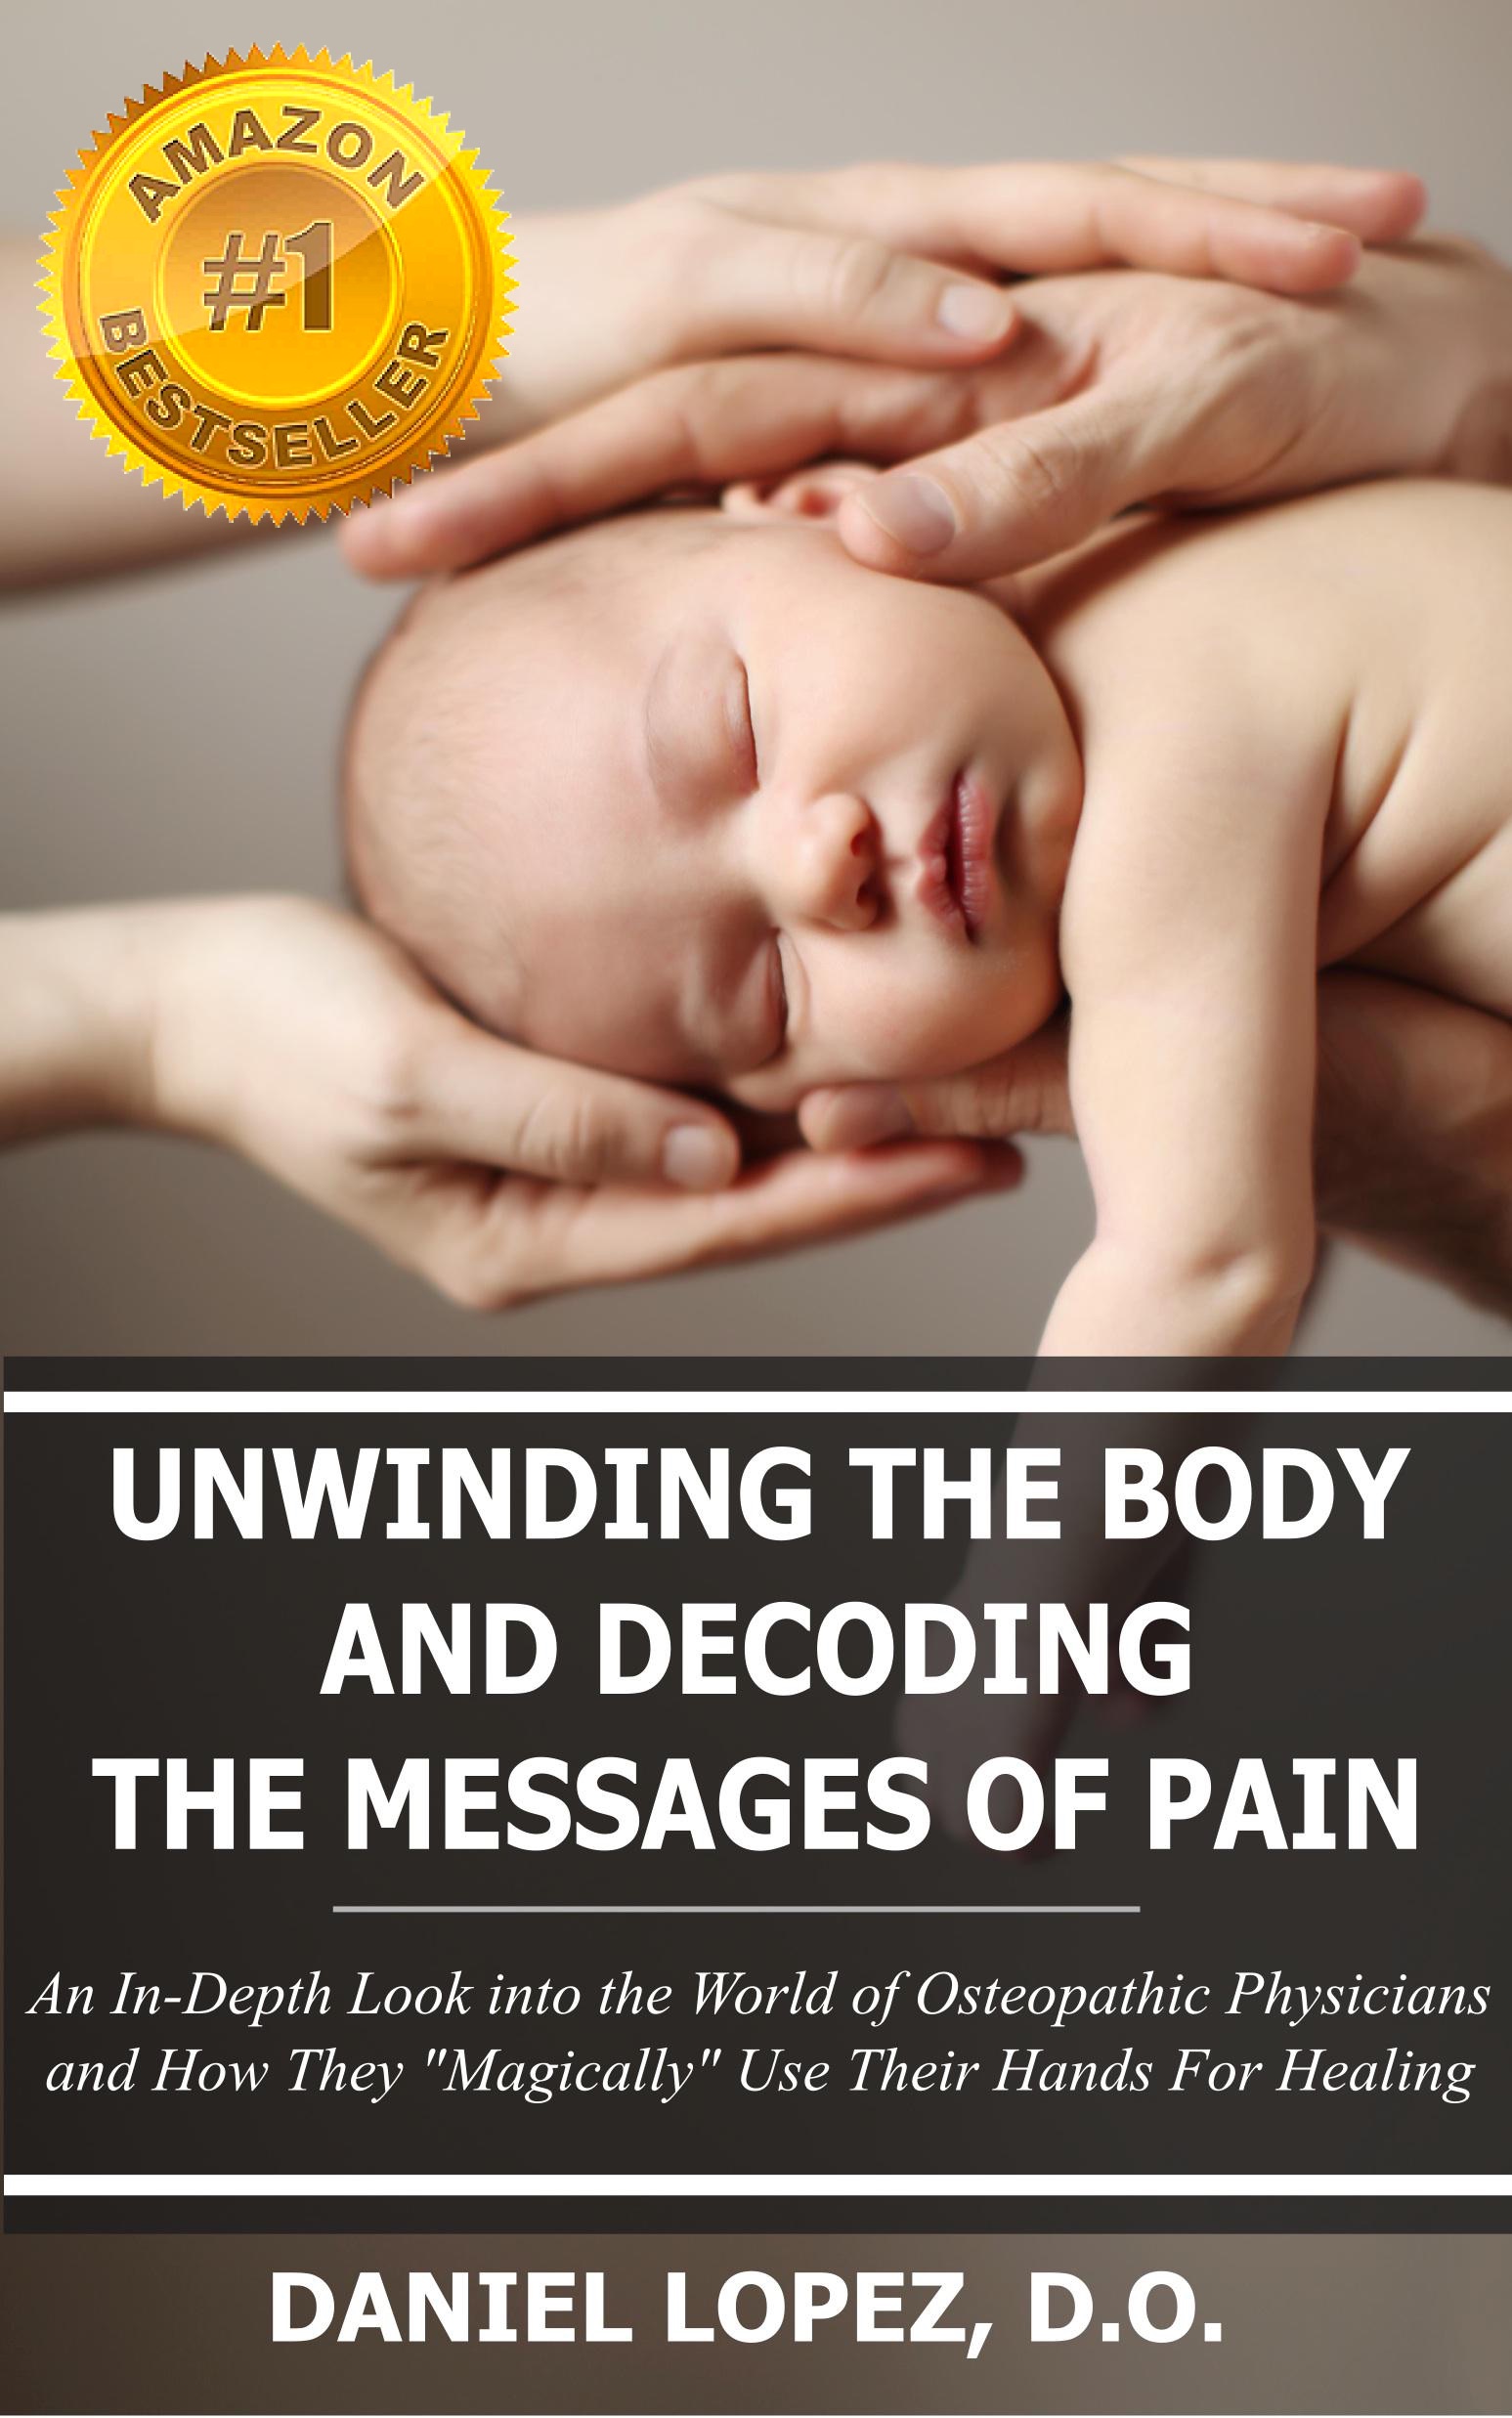 Unwinding the Body and Decoding the Messages of Pain